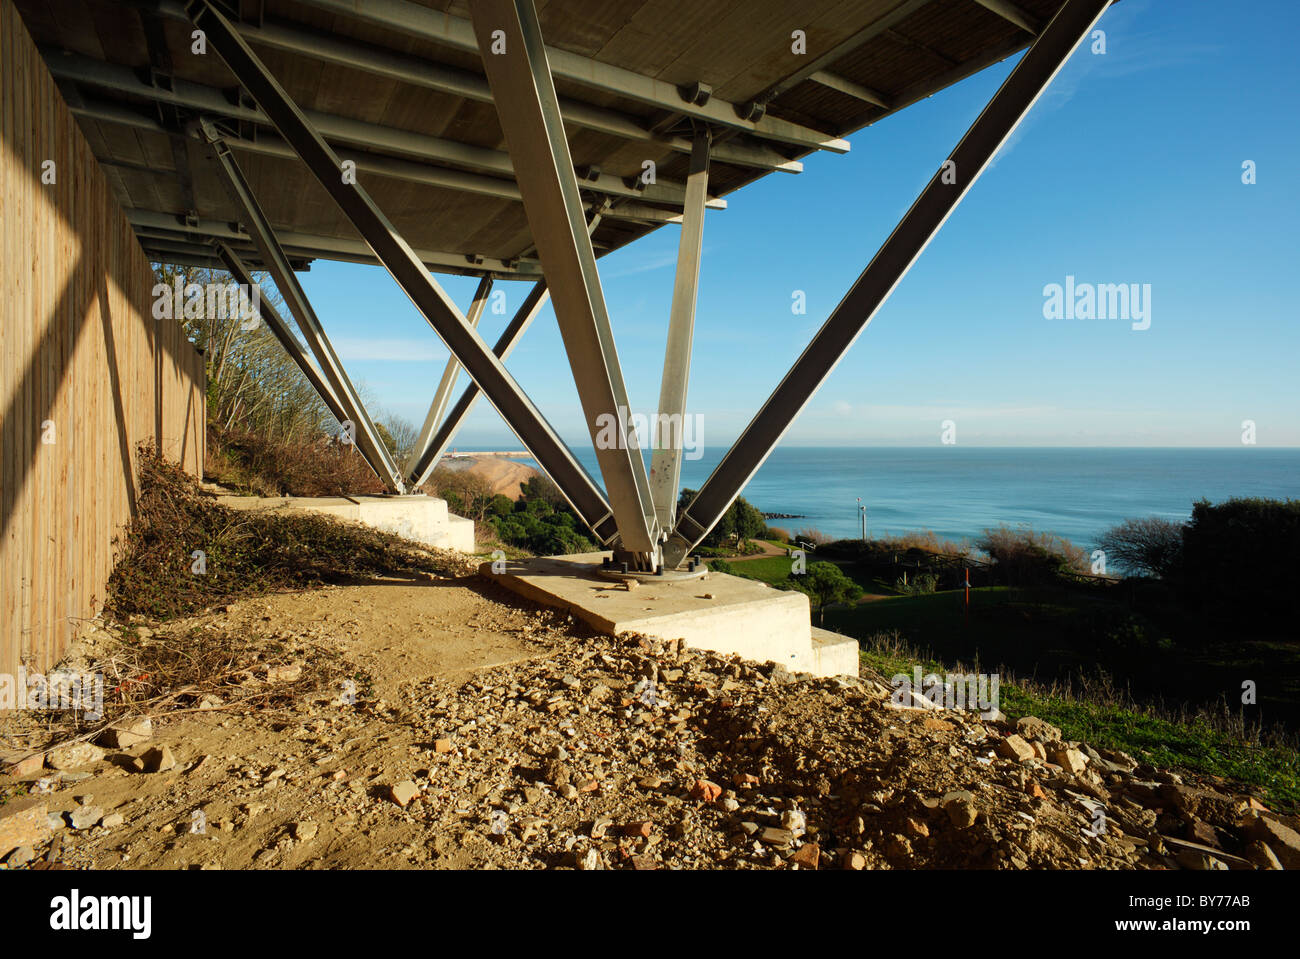 The foundations of Cliff Hall, the Leas, Folkestone, Kent, England, UK. Stock Photo